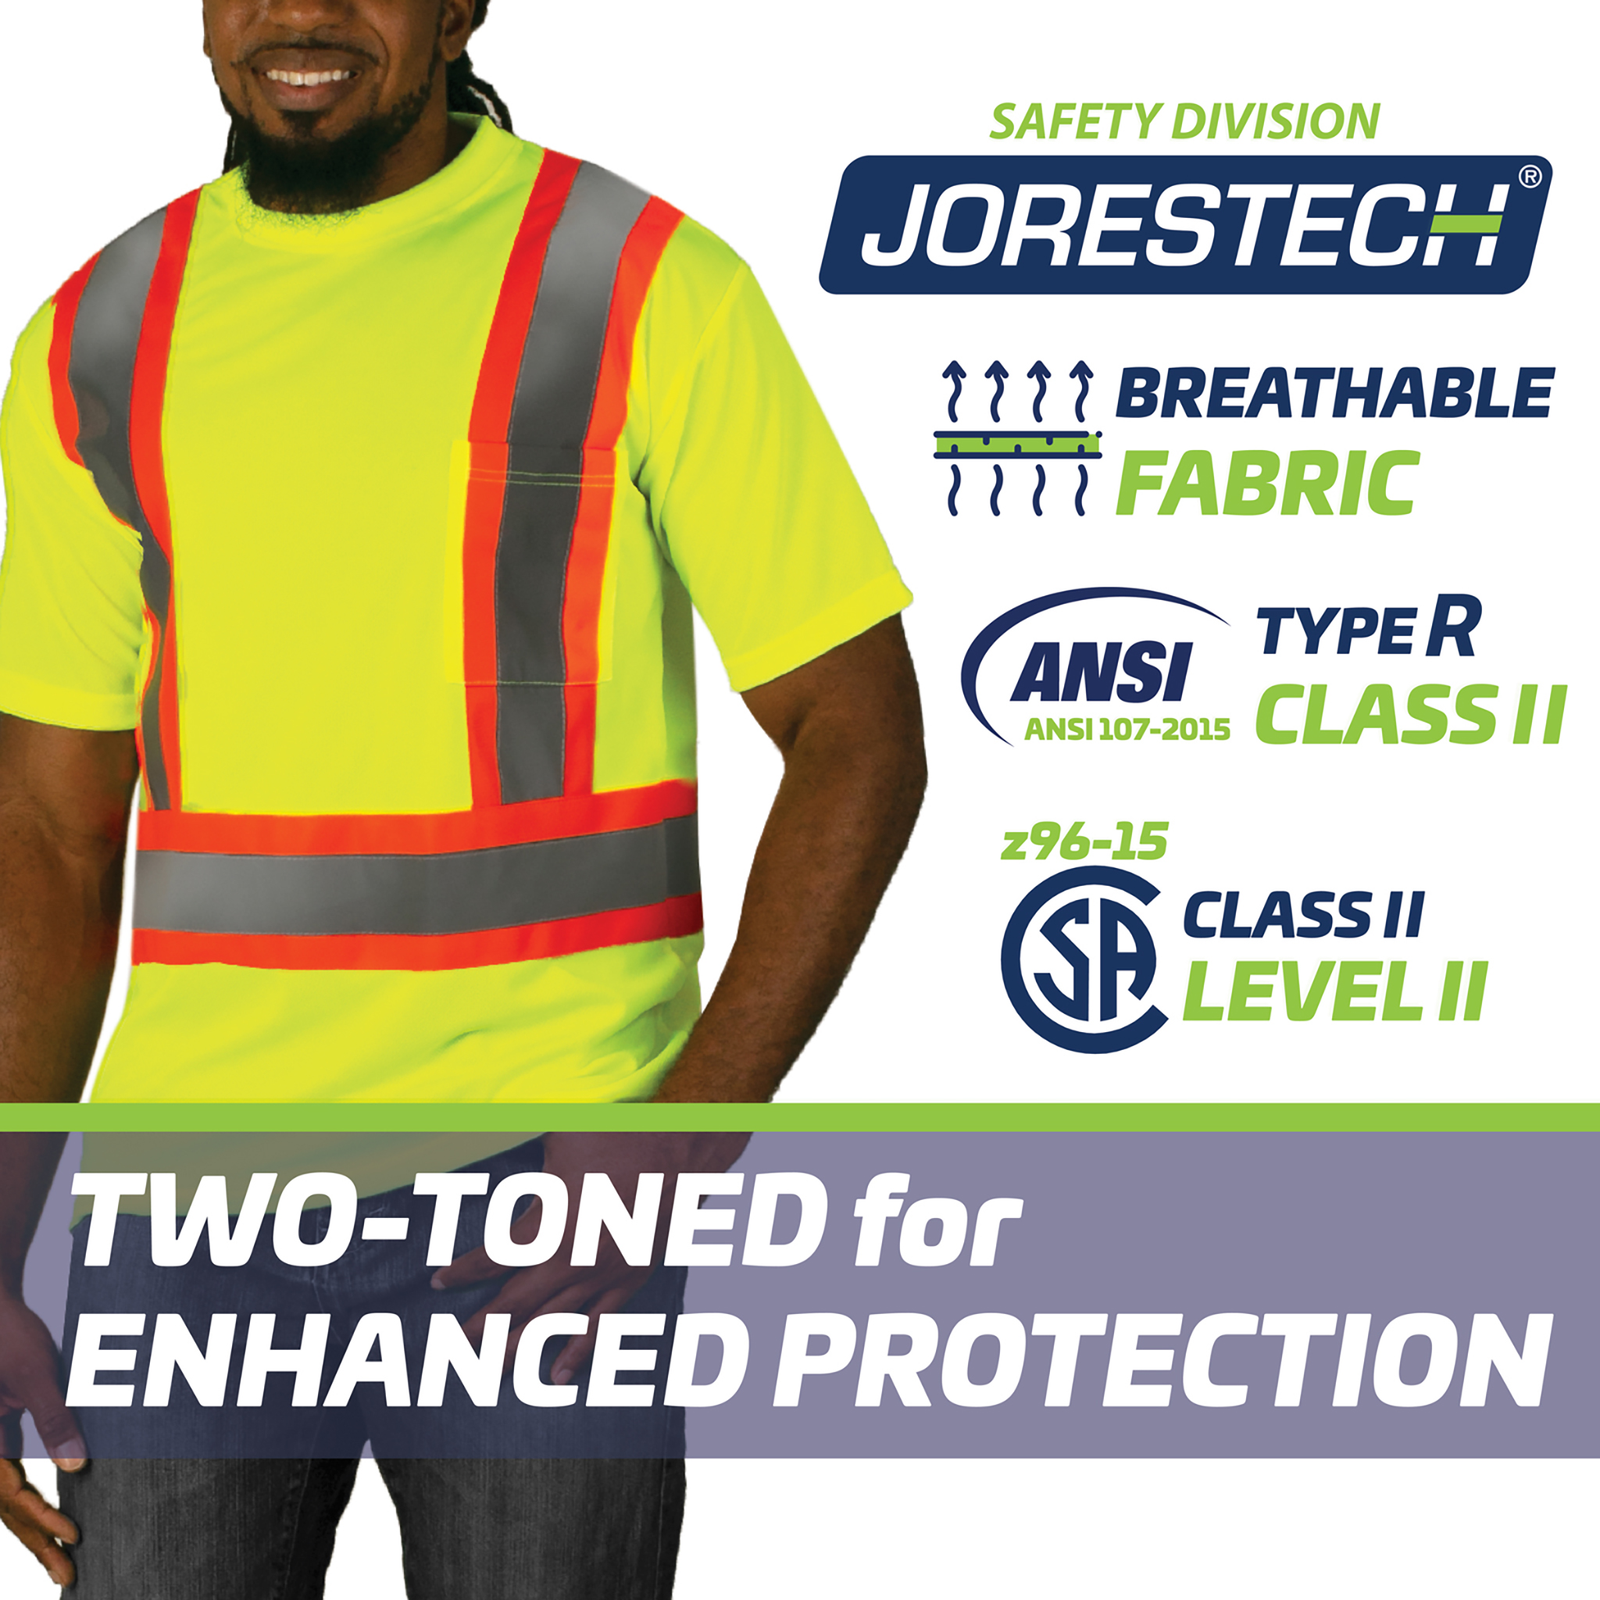 A man wearing a yellow and orange reflective safety shirt. Icos with text read: Breathable fabric, ANSI Type O, Class I. SA Class I Level II. Two toned for enhanced protection.